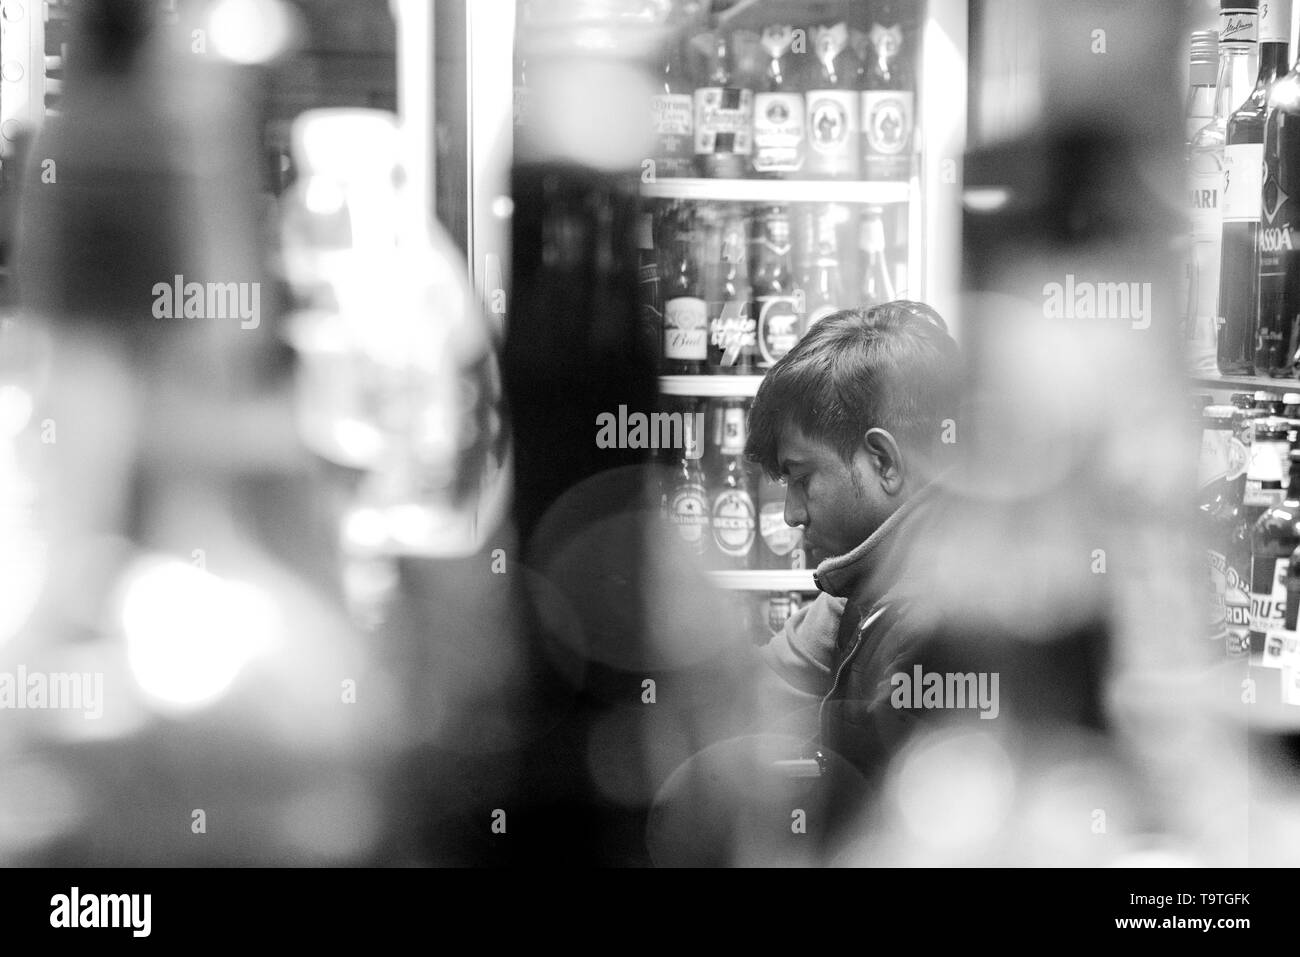 man sitting  among bottles with bokeh, in black and white Stock Photo